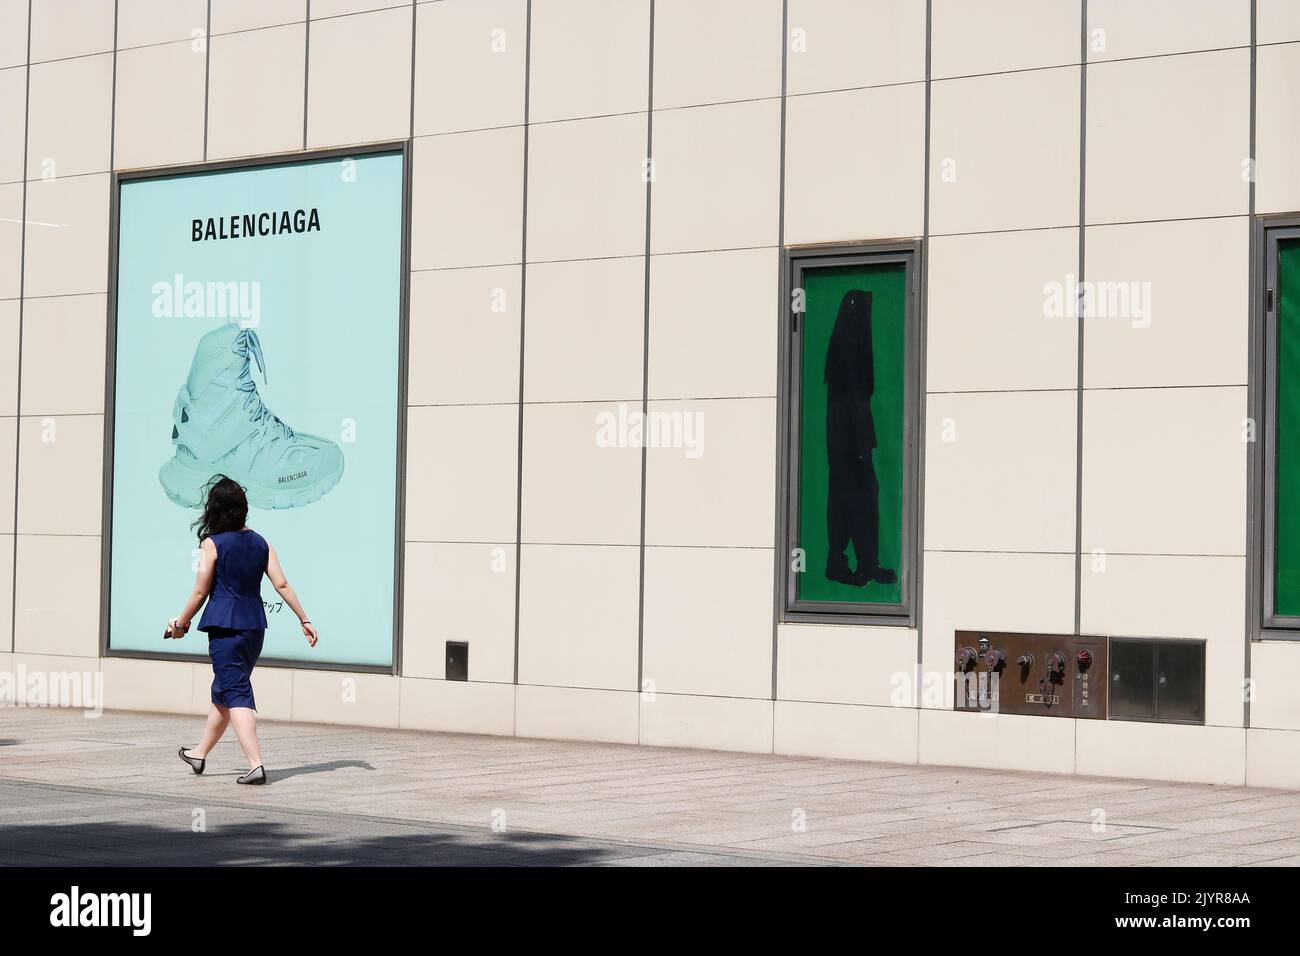 TOKYO, JAPAN - June 10, 2021: Balenciaga adverts on the wall of Lumine Yurakucho, a large multi-function building in central Tokyo. Stock Photo